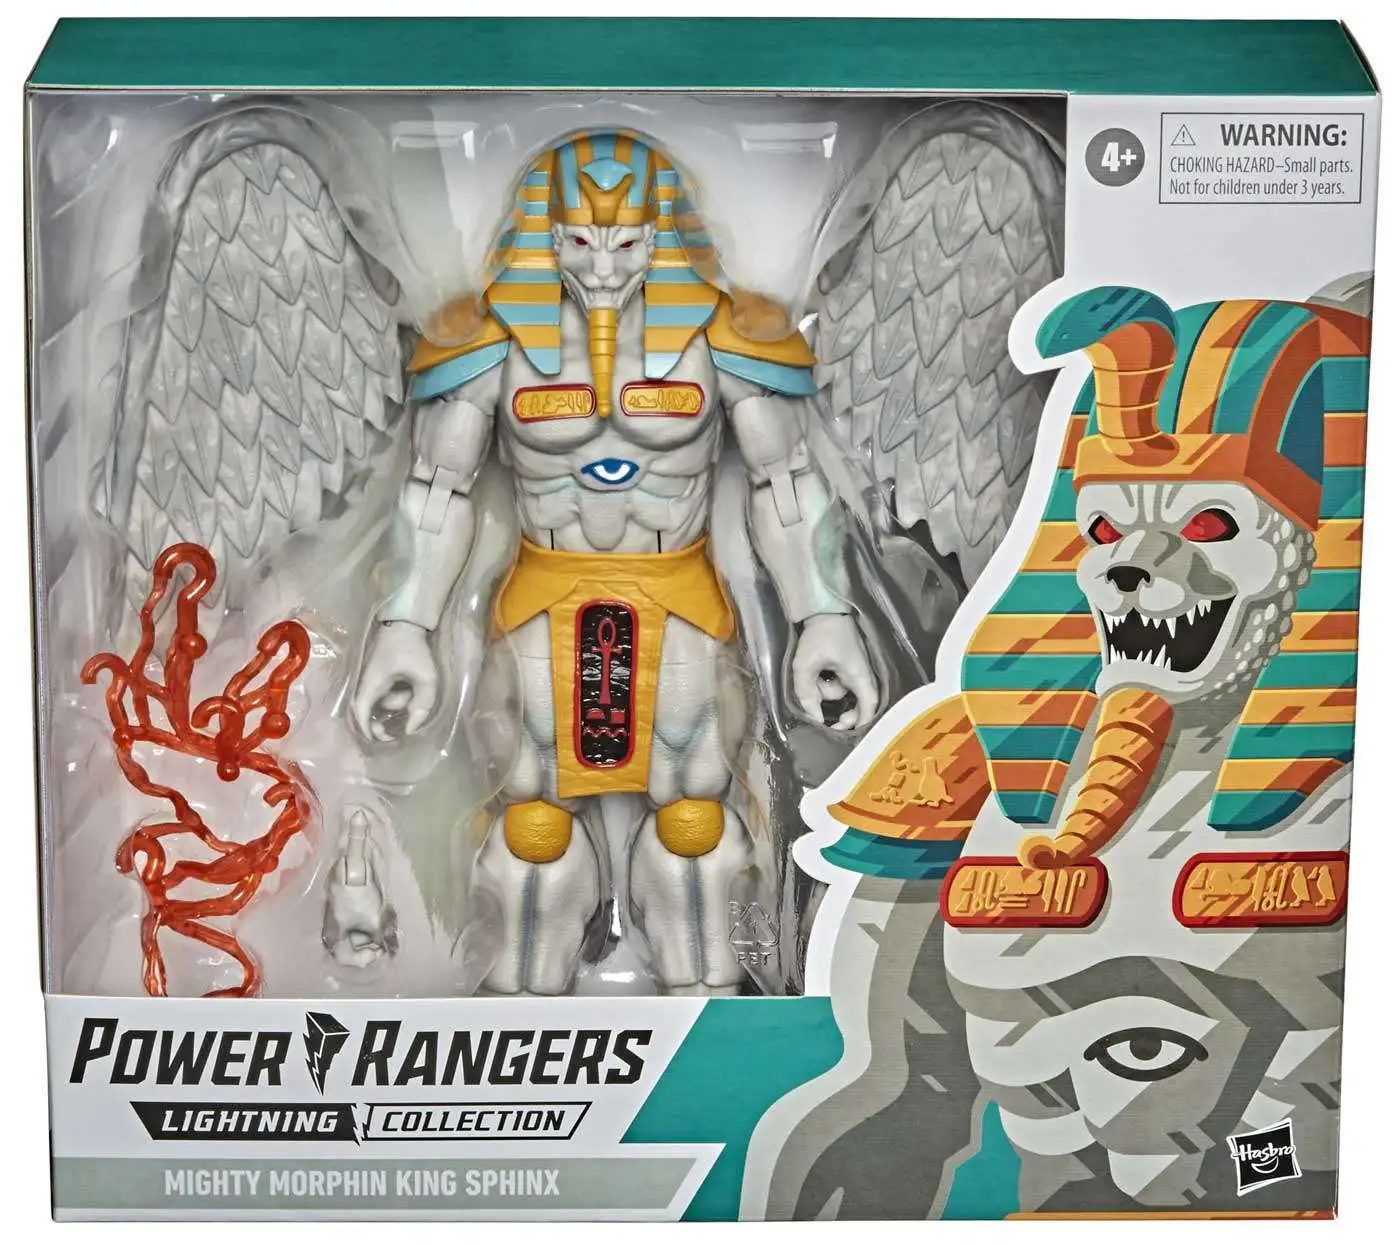 Power Rangers 2020 Lightning Collection Mighty Morphin King Sphinx for sale online 